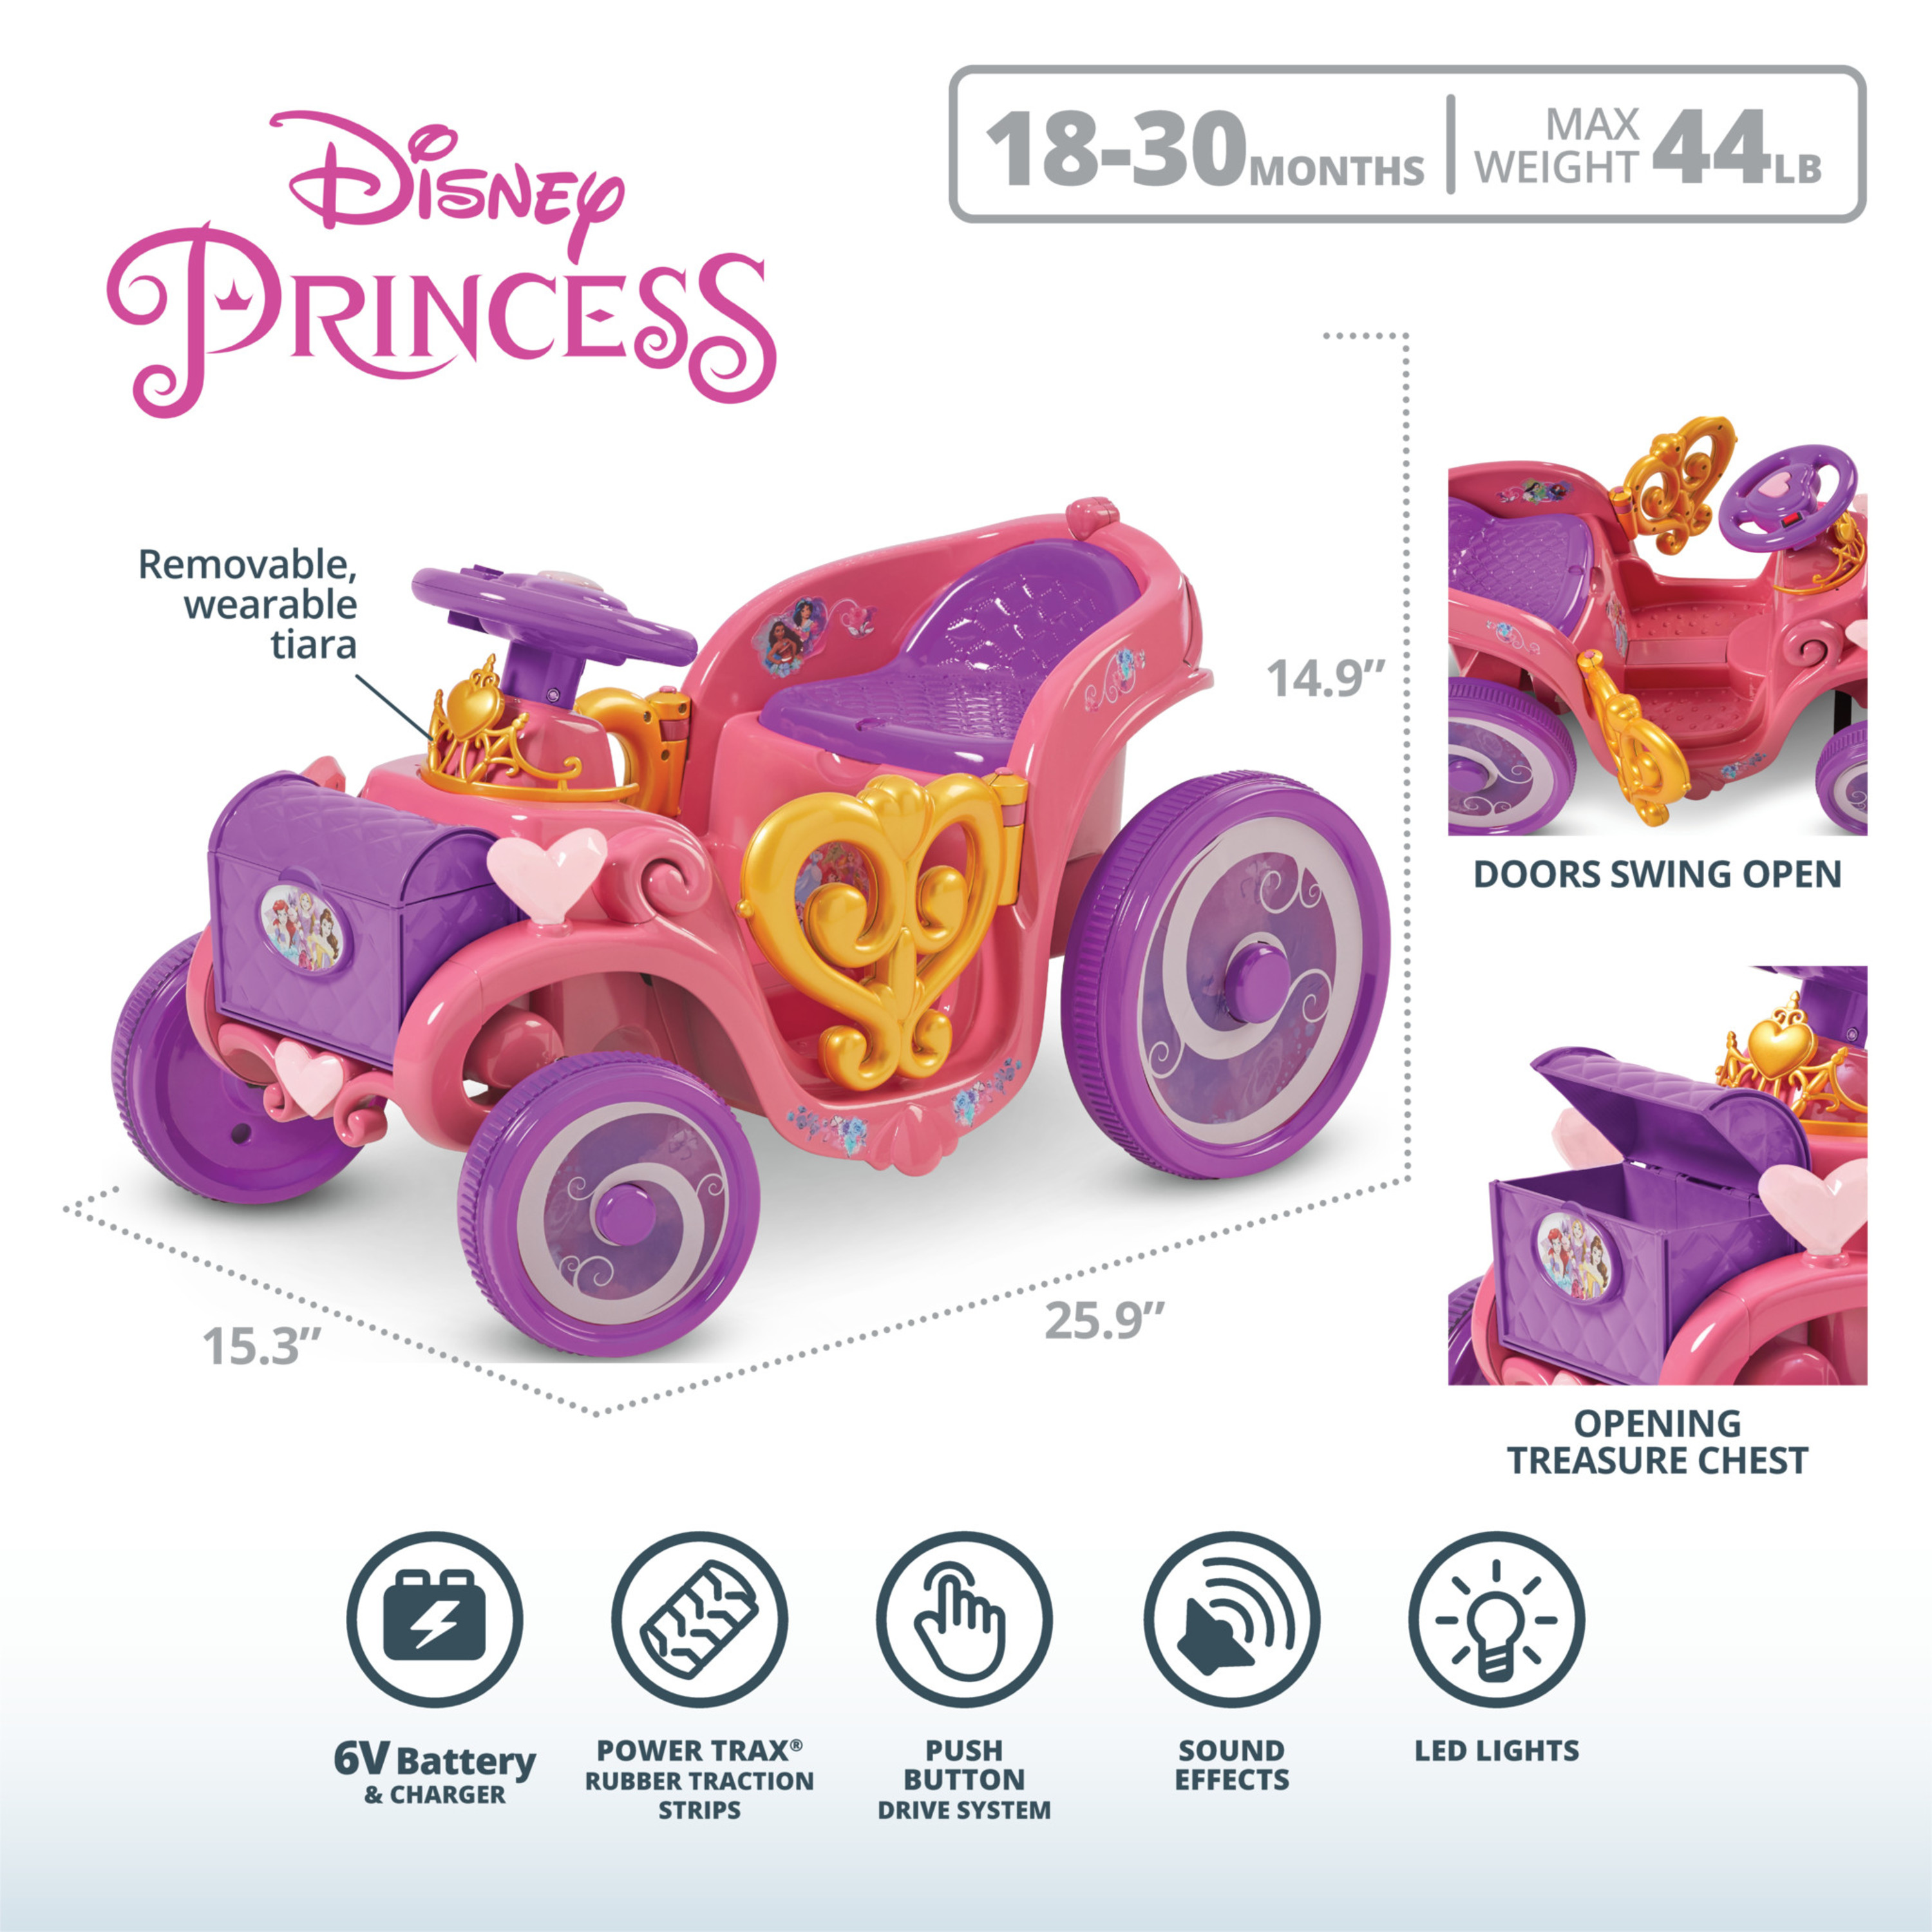 Disney Princess Enchanted Adventure Carriage Quad, 6-Volt Ride-On Toy by Kid Trax, ages 18-30 months, pink - image 6 of 8